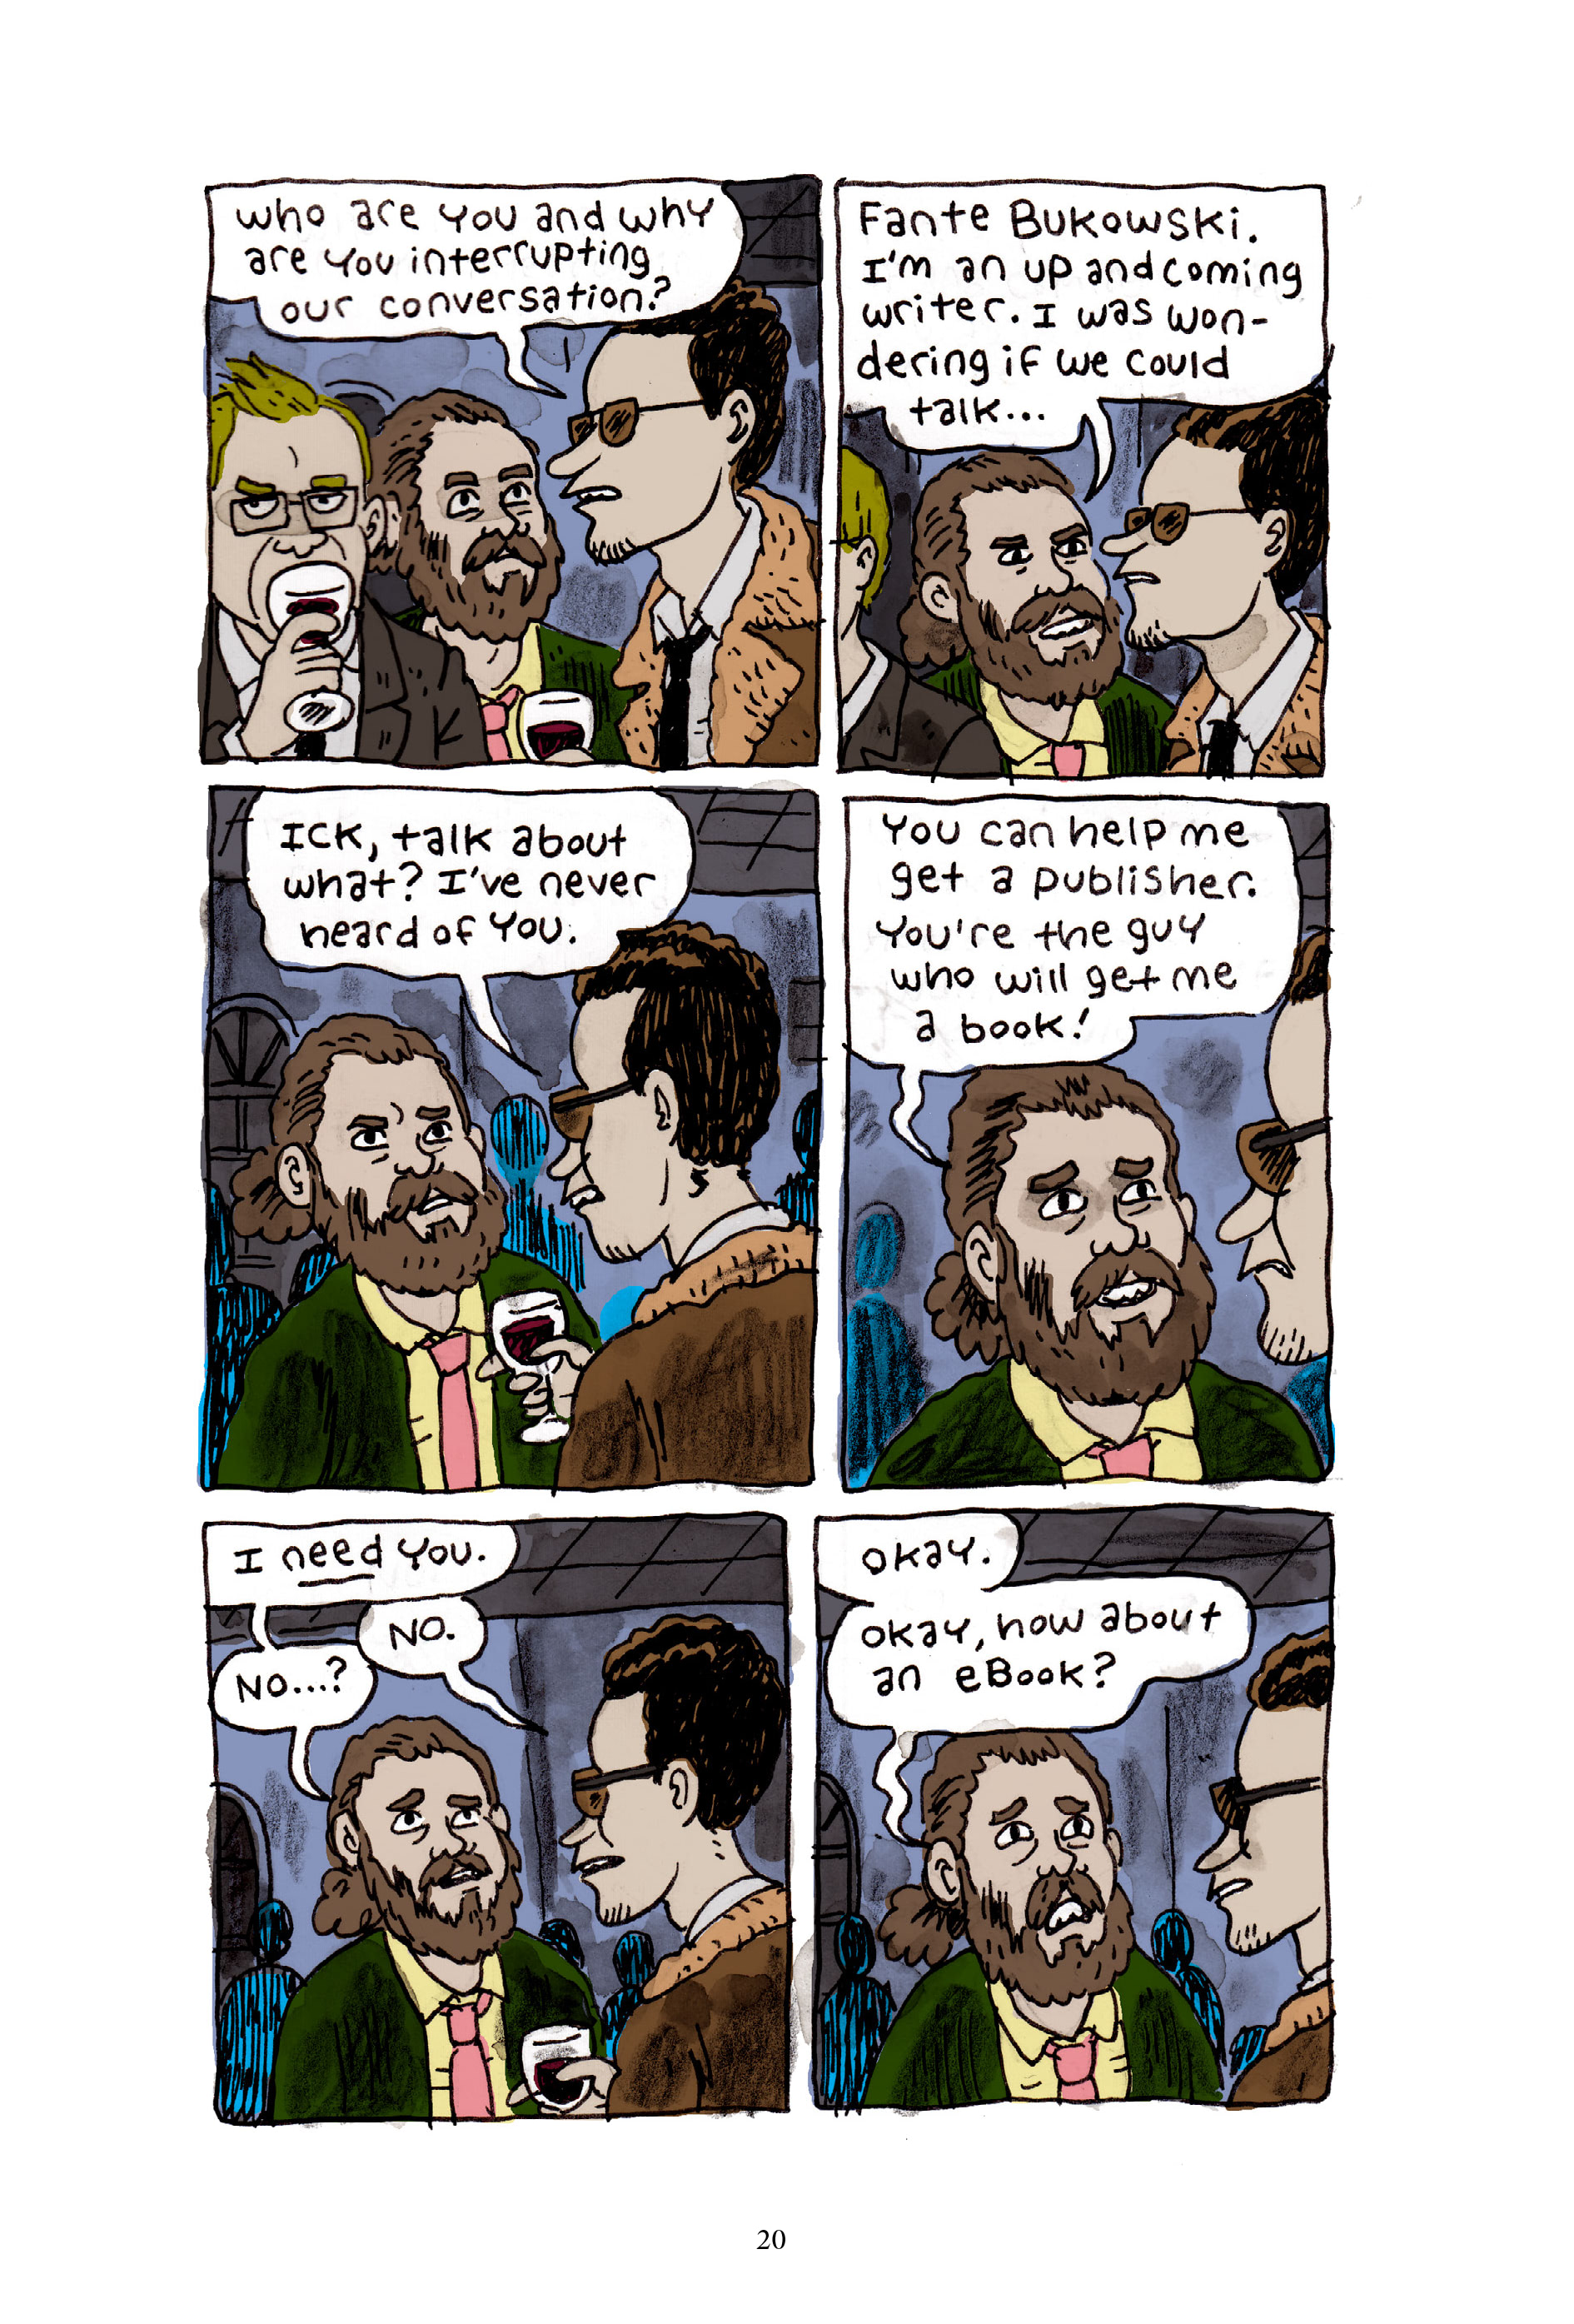 Read online The Complete Works of Fante Bukowski comic -  Issue # TPB (Part 1) - 19